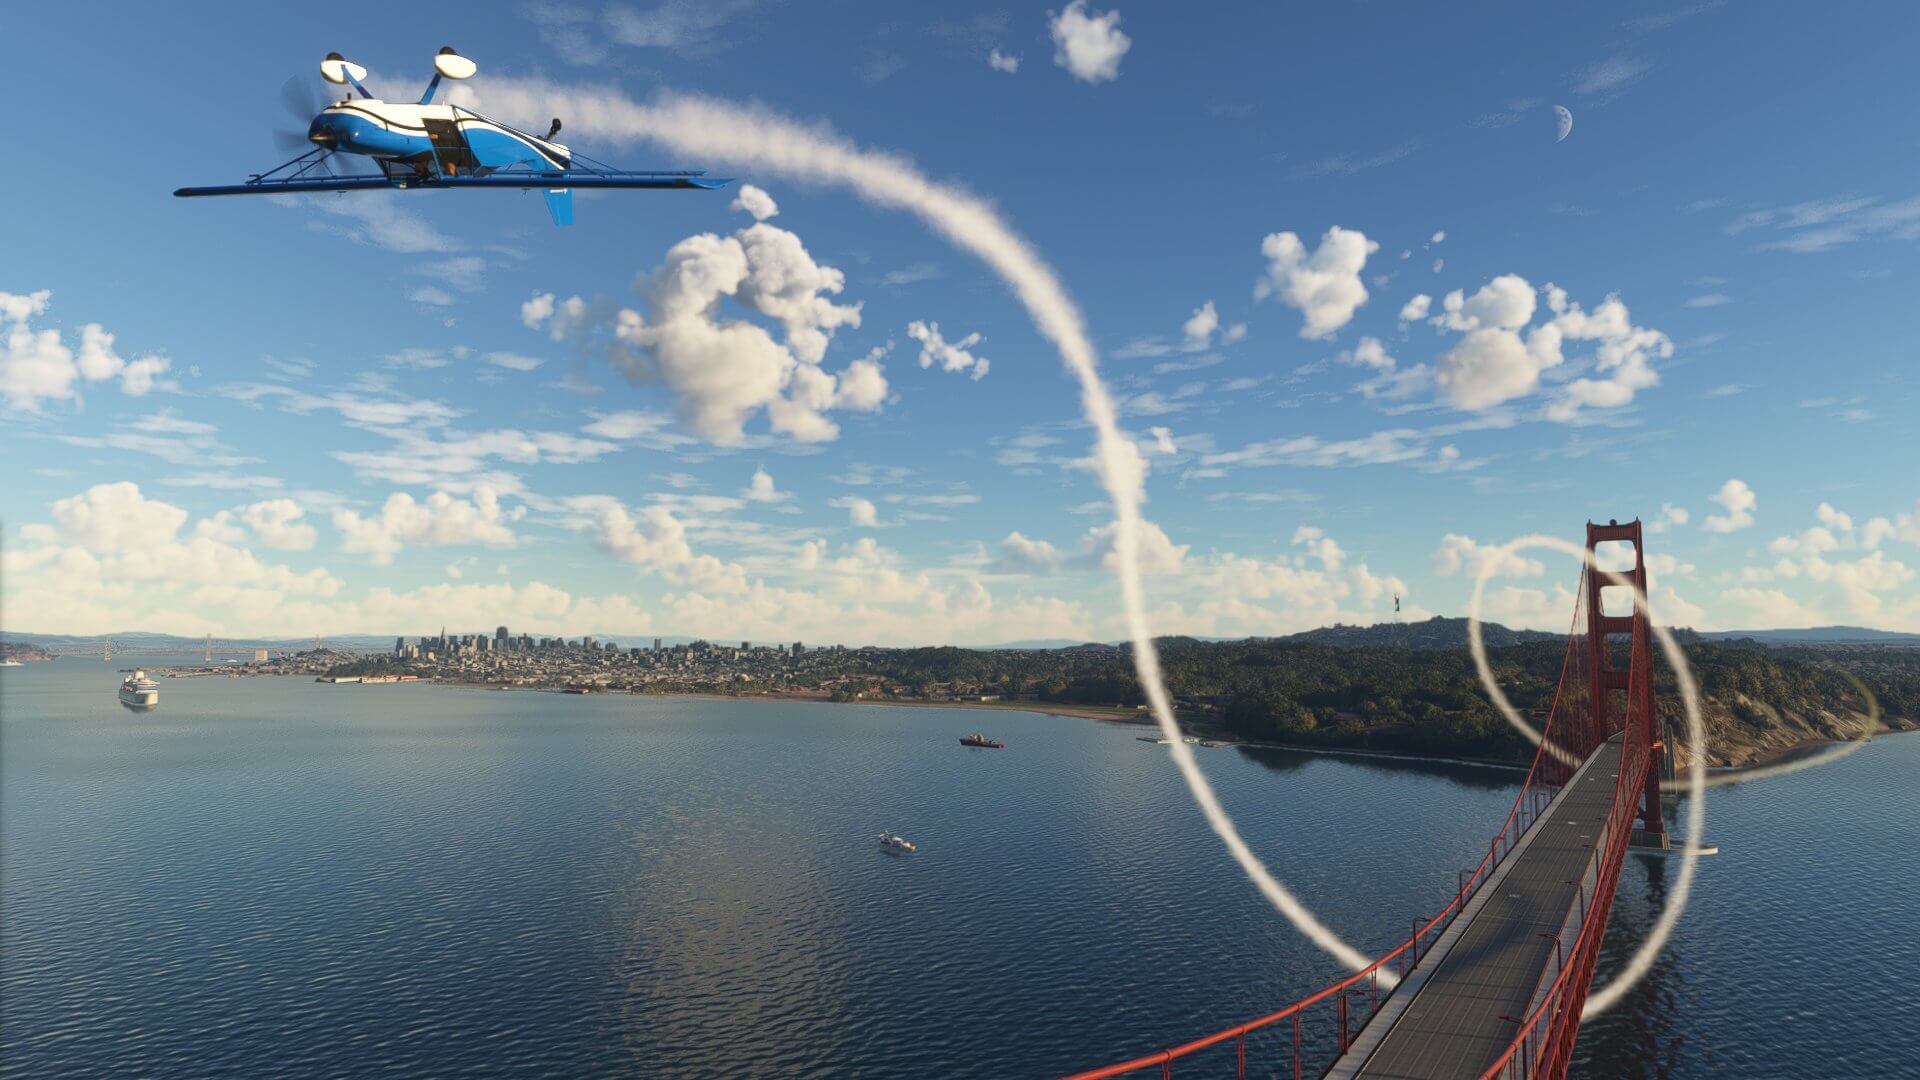 A small general aviation aircraft in blue paint scheme loops inverted above the Golden Gate Bridge, San Fransisco with white smoke pluming around the bridge behind.